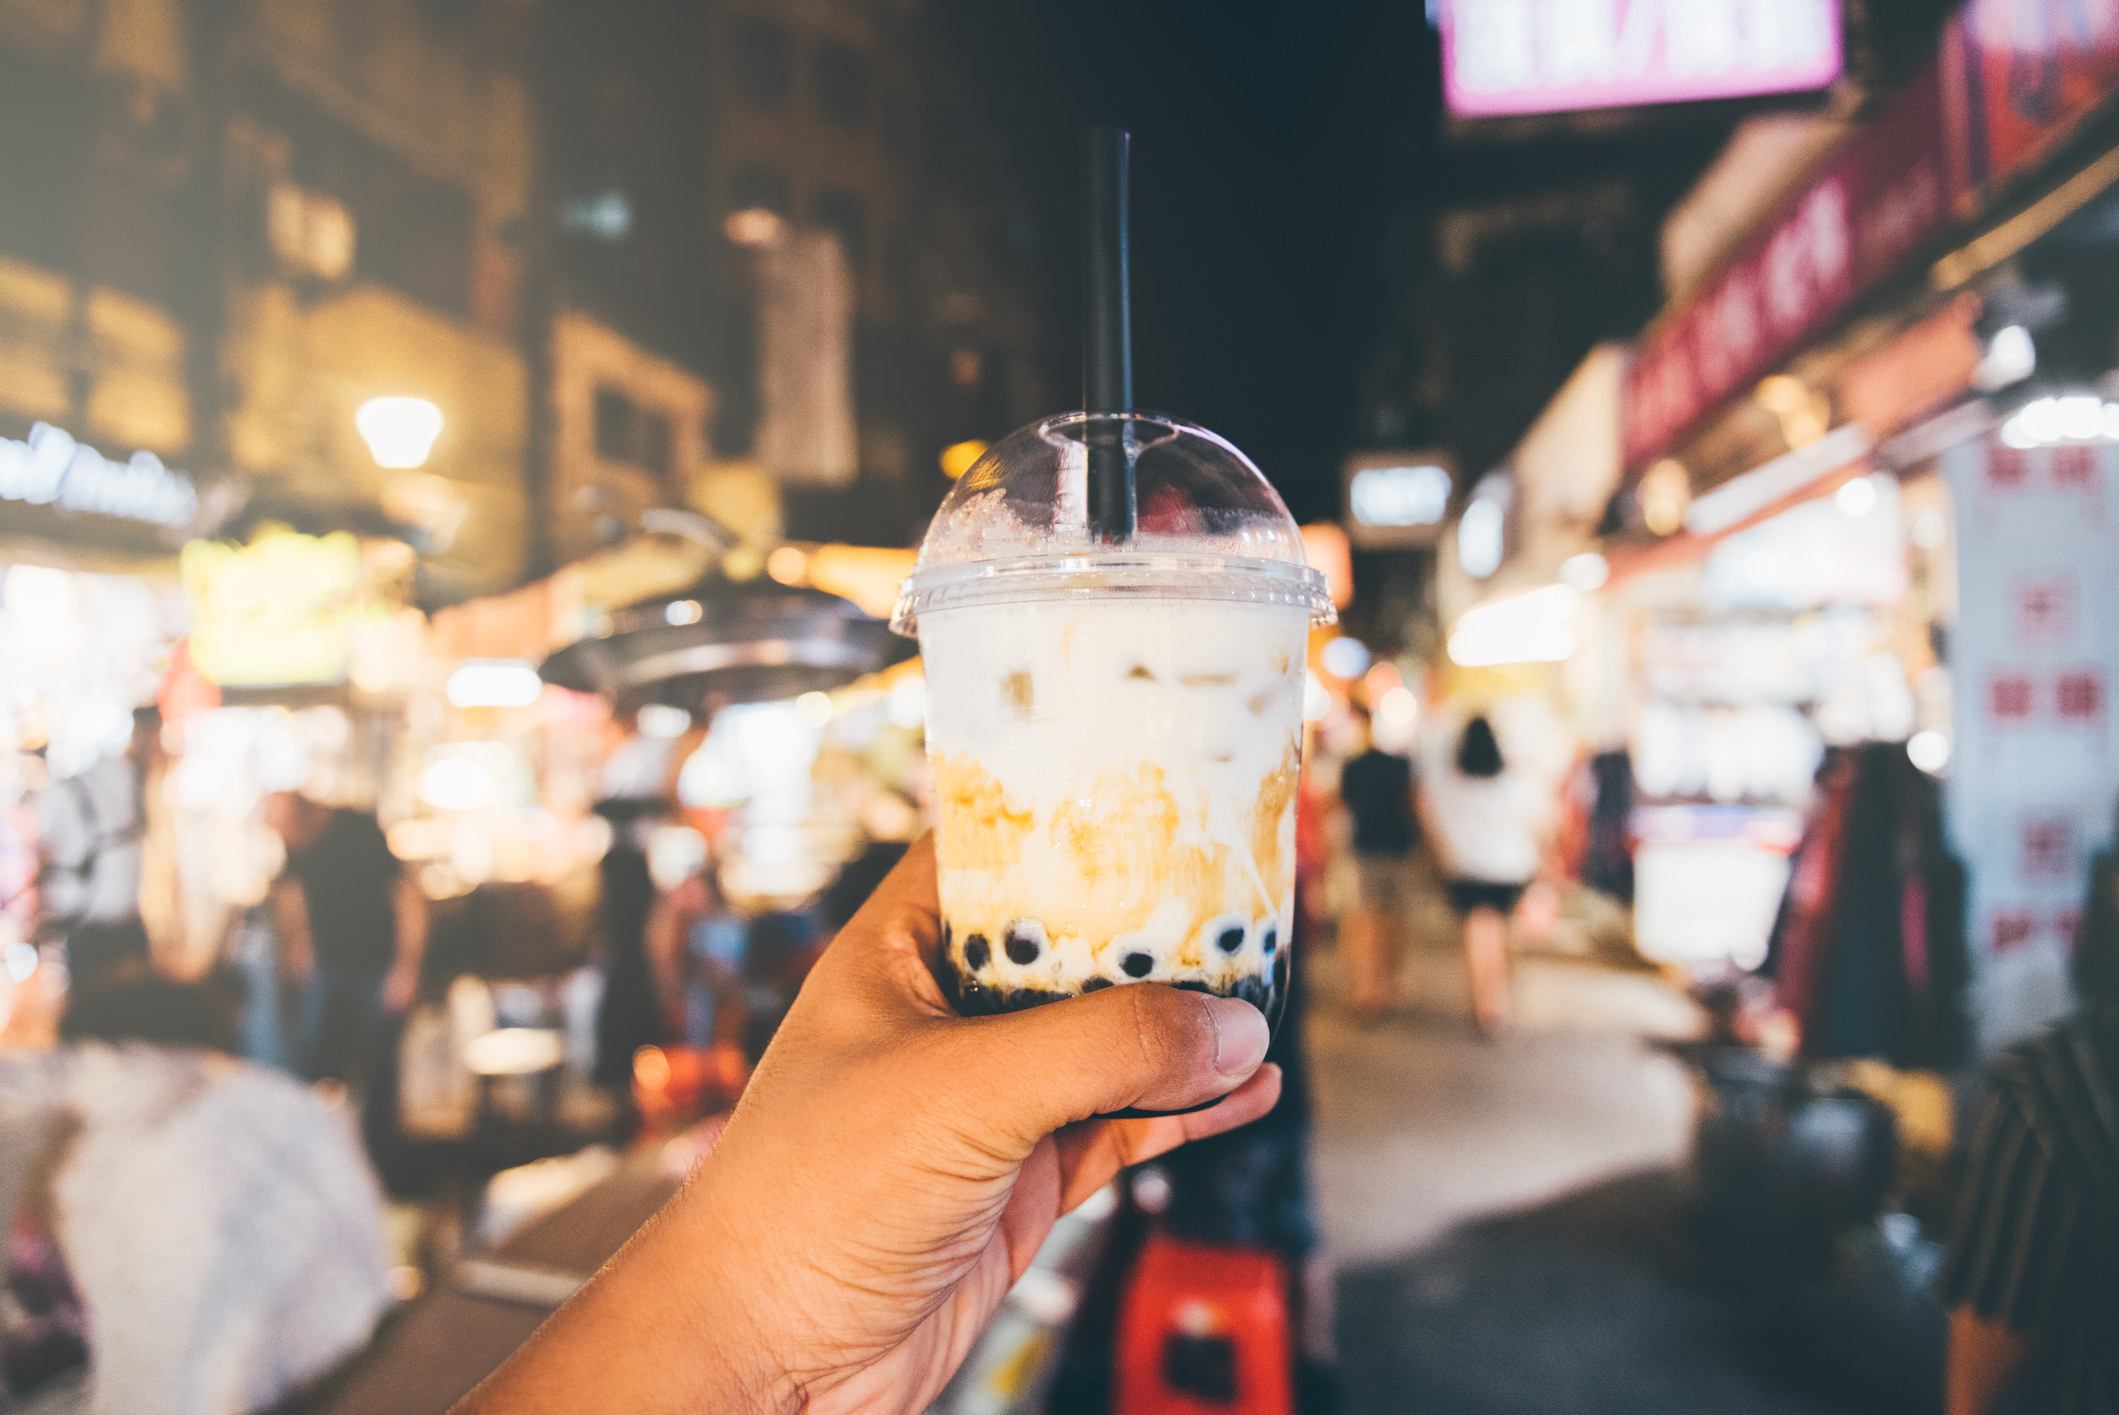 A hand holding boba tea in a night market.